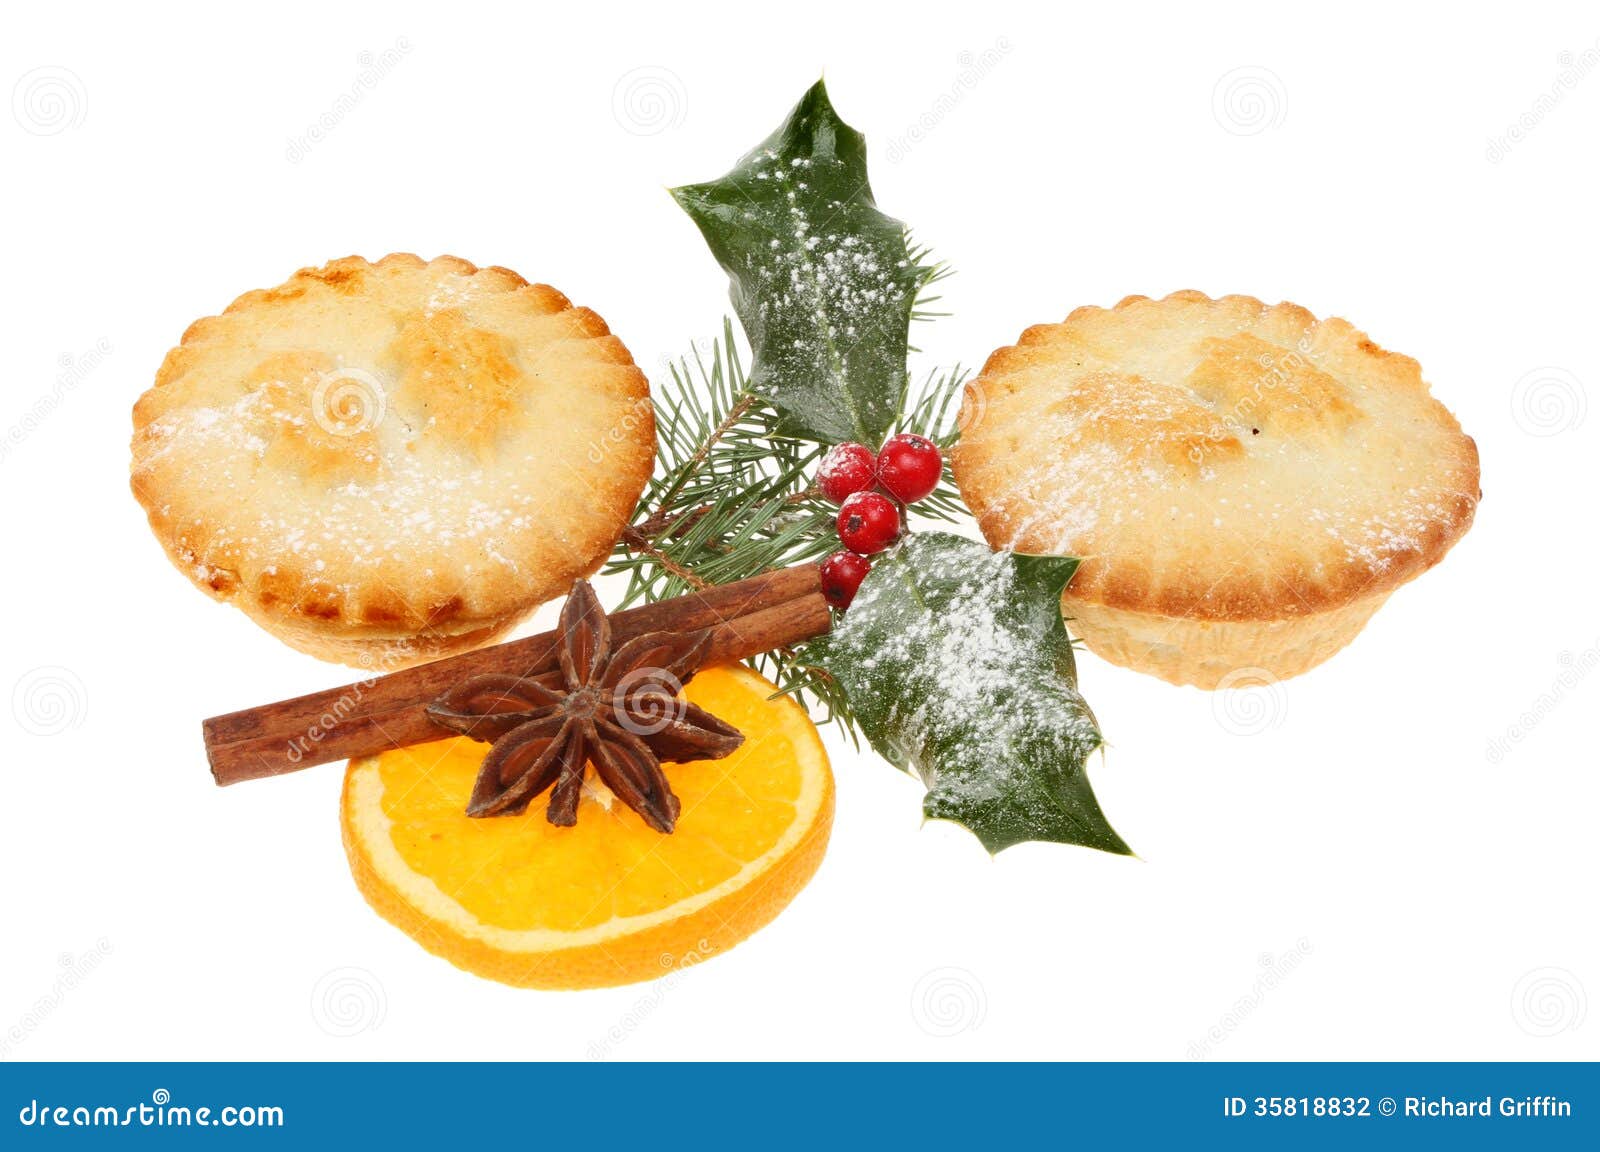 clipart christmas mince pies - photo #49